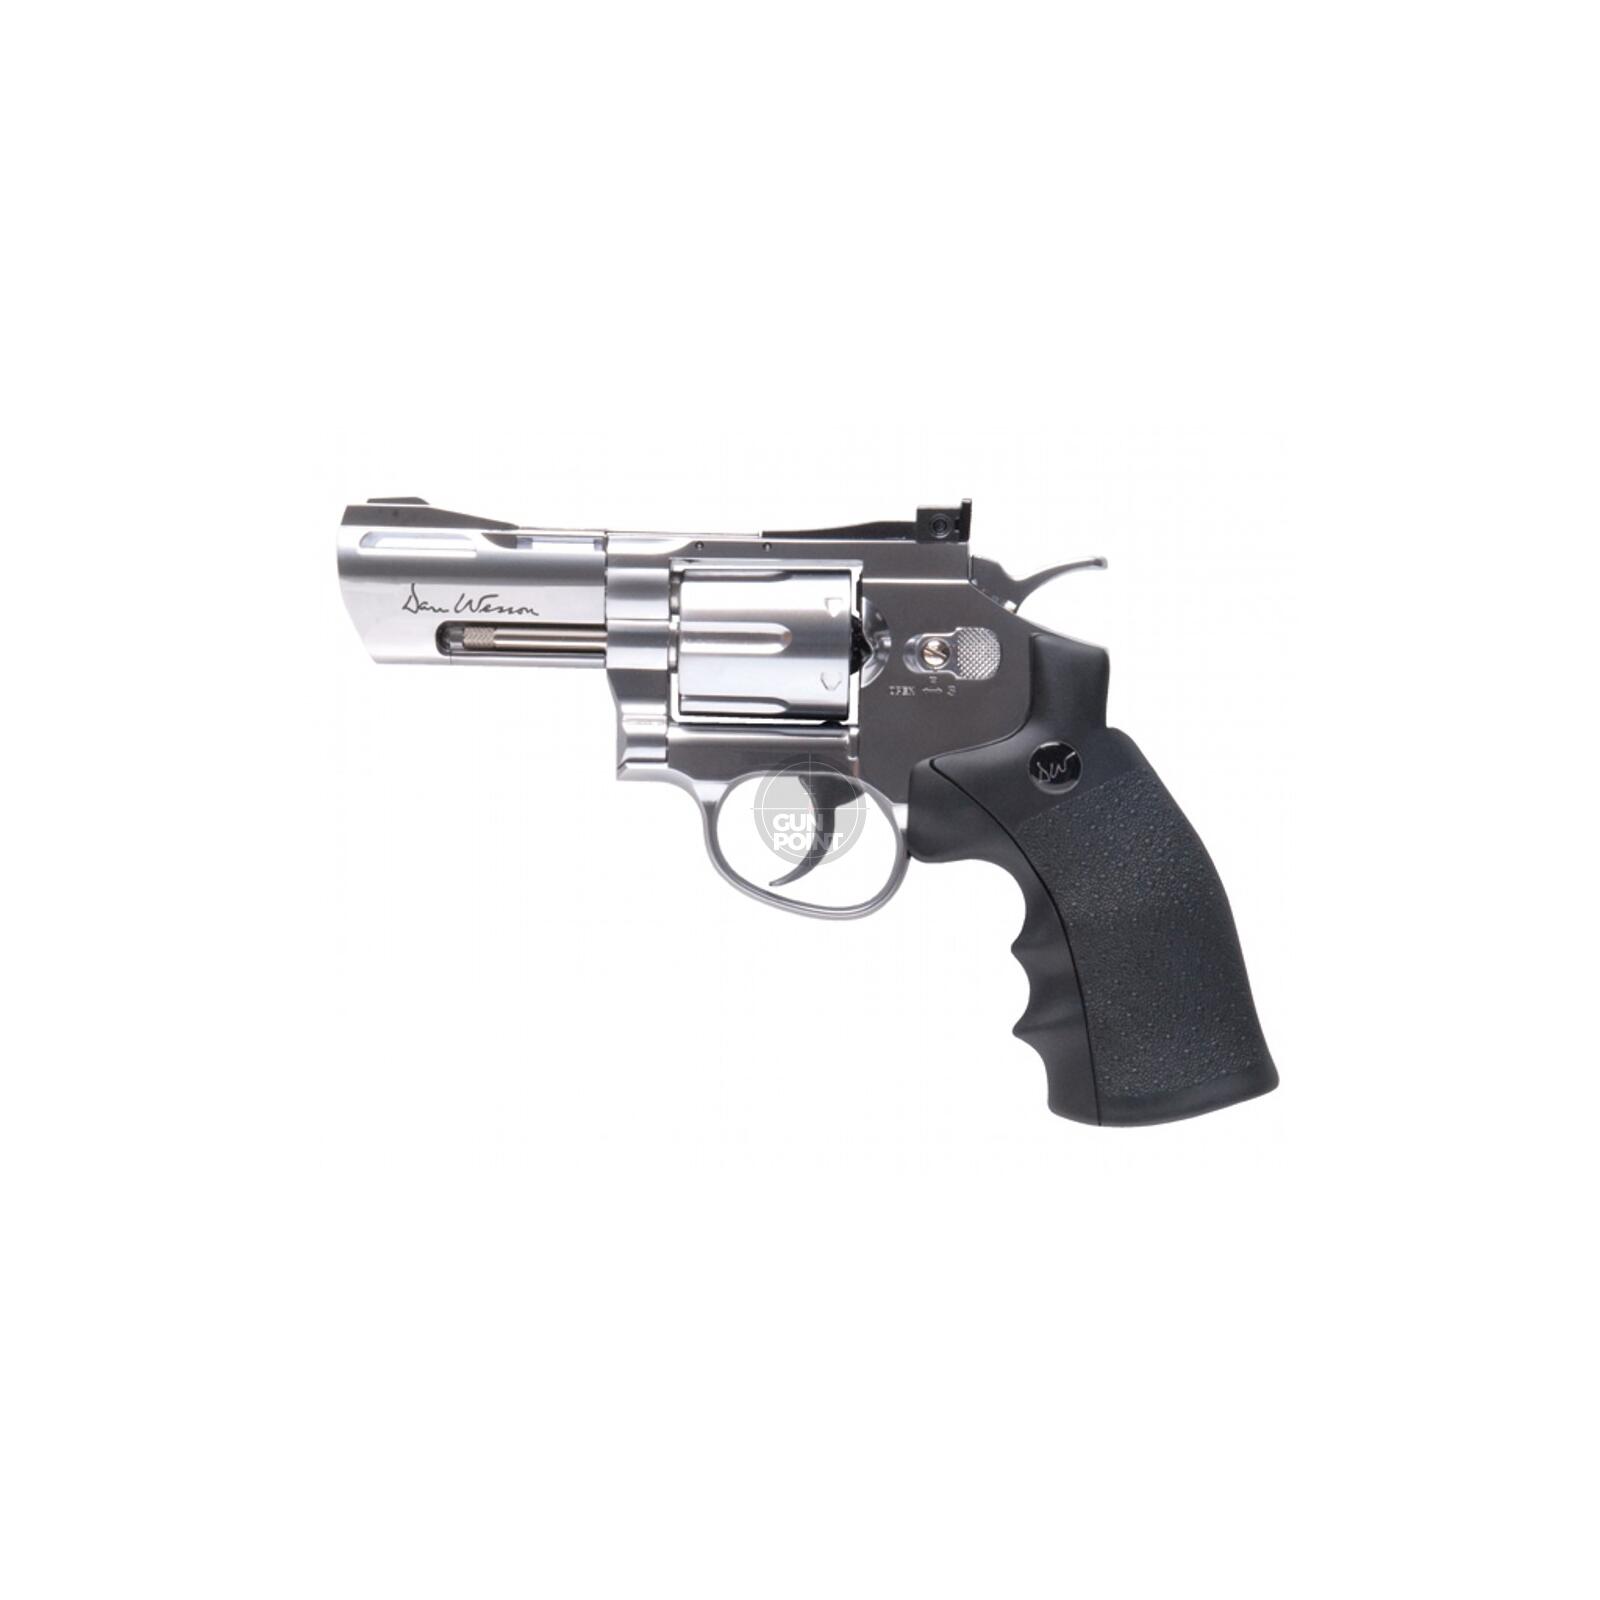 Luftpistole - Dan Wesson 2,5 Co2-System NBB Silber - Kal. 4,5 mm